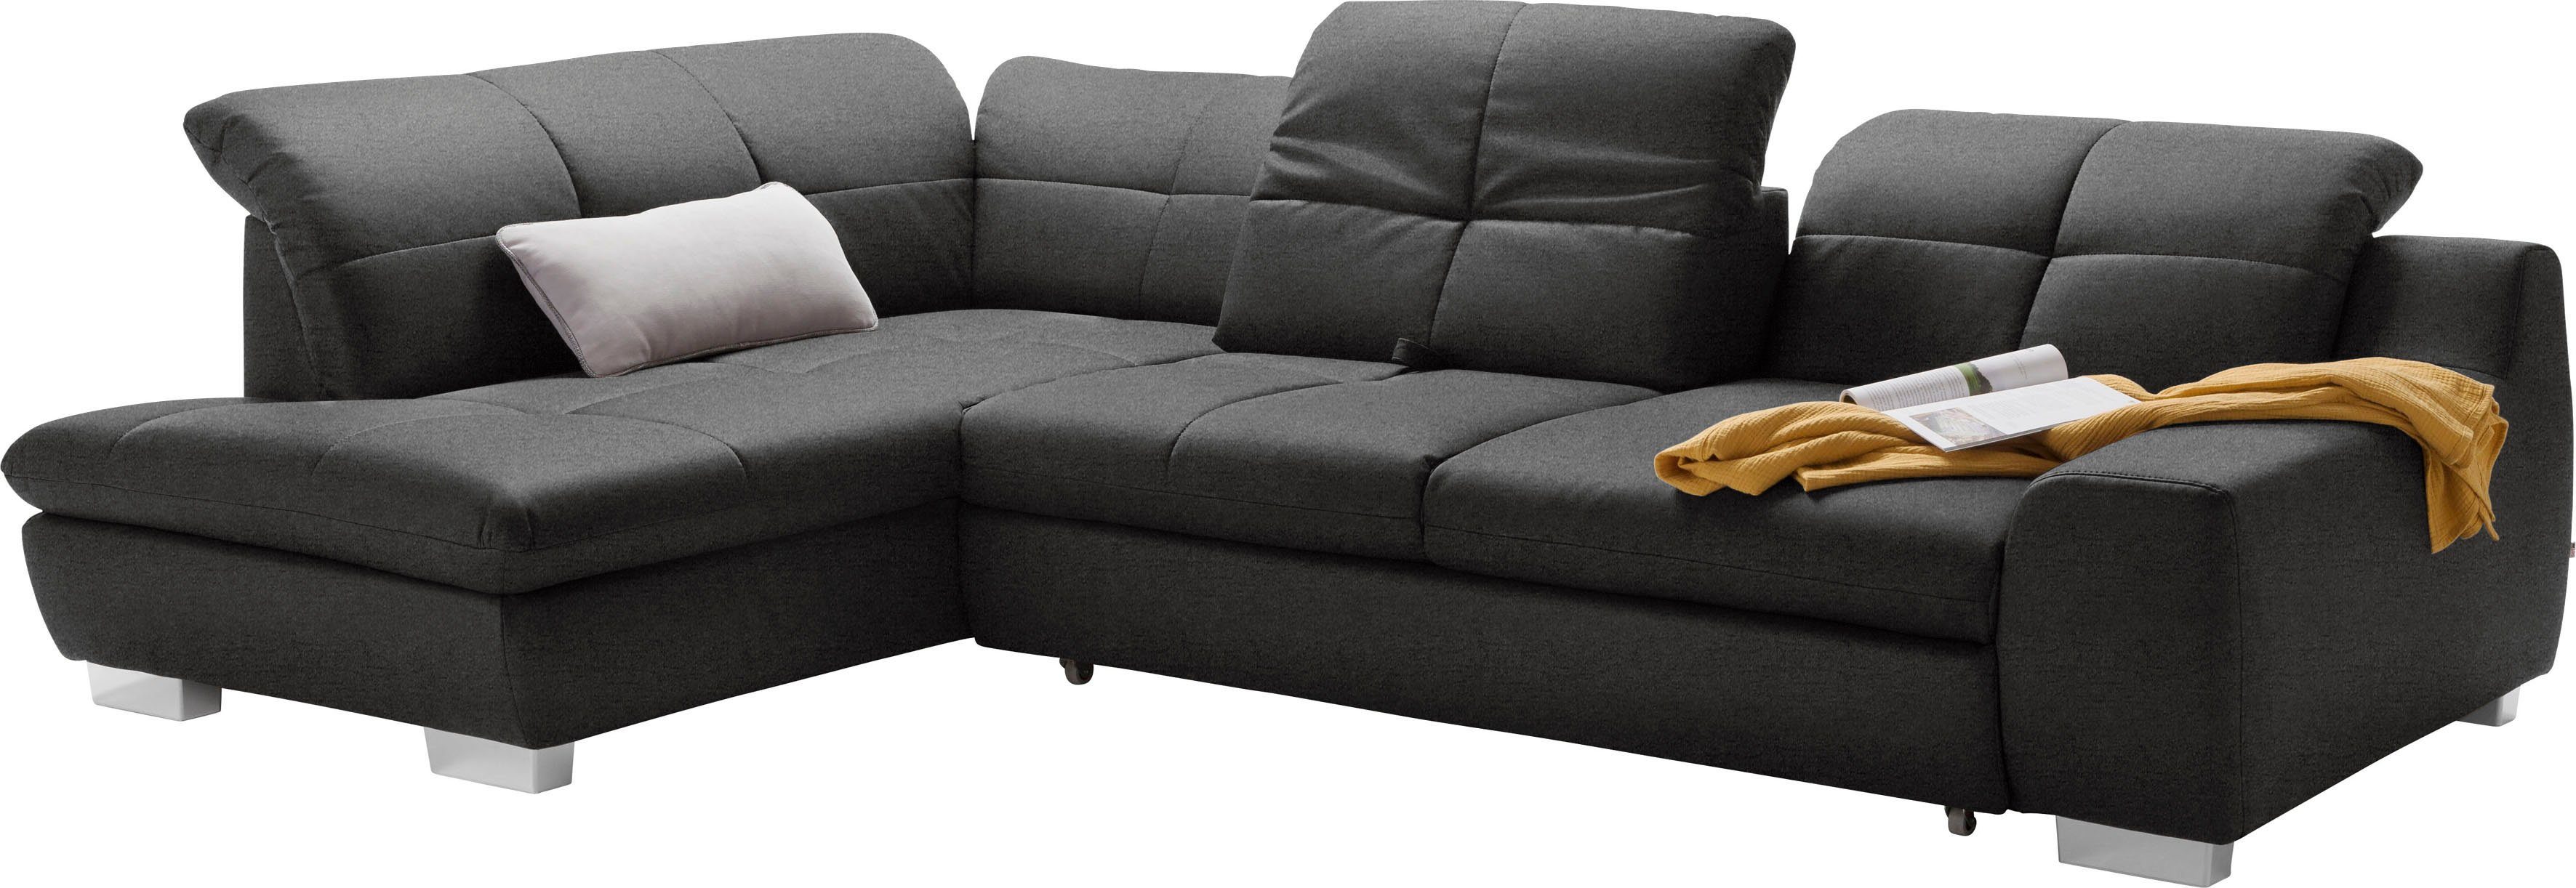 Musterring one Ecksofa 1200, set Bettfunktion by mit wahlweise SO